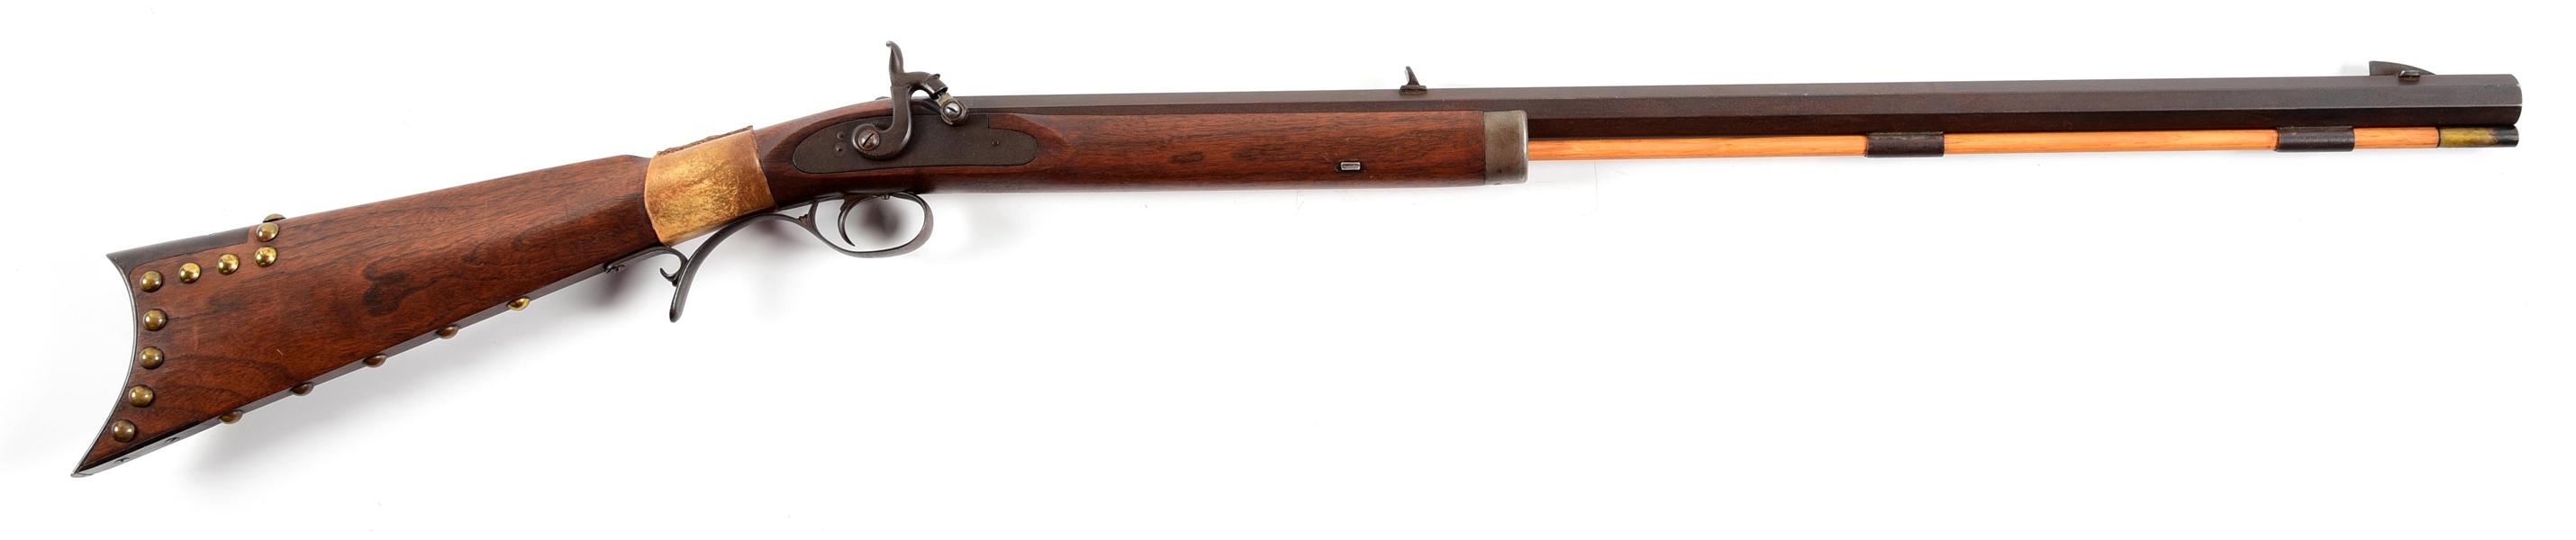 (A) SHARON PERCUSSION RIFLE WITH FRONTIER DECORATION